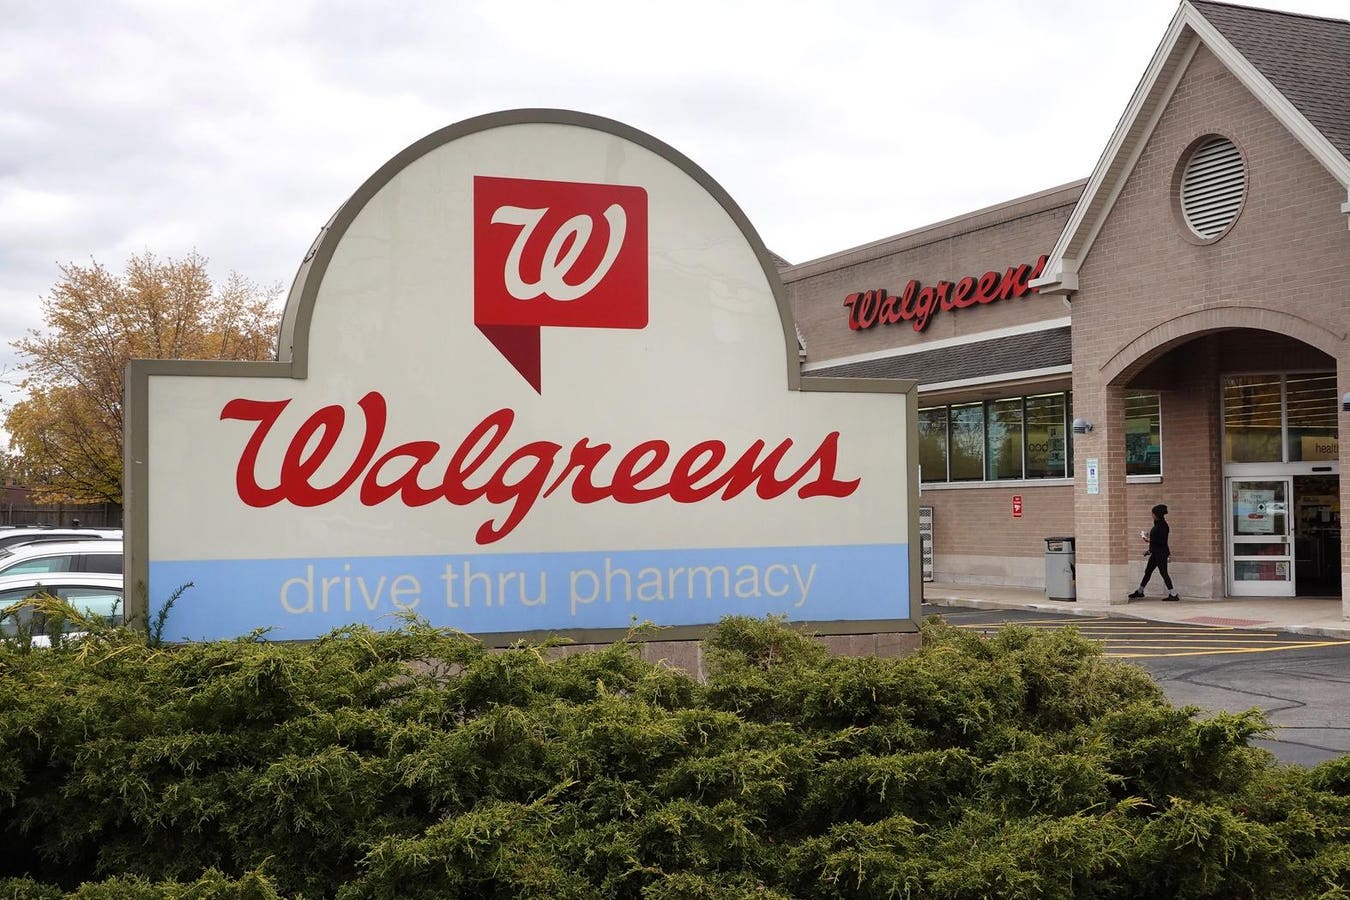 Walgreens posts $344 million profit as CEO calls for patience on turnaround